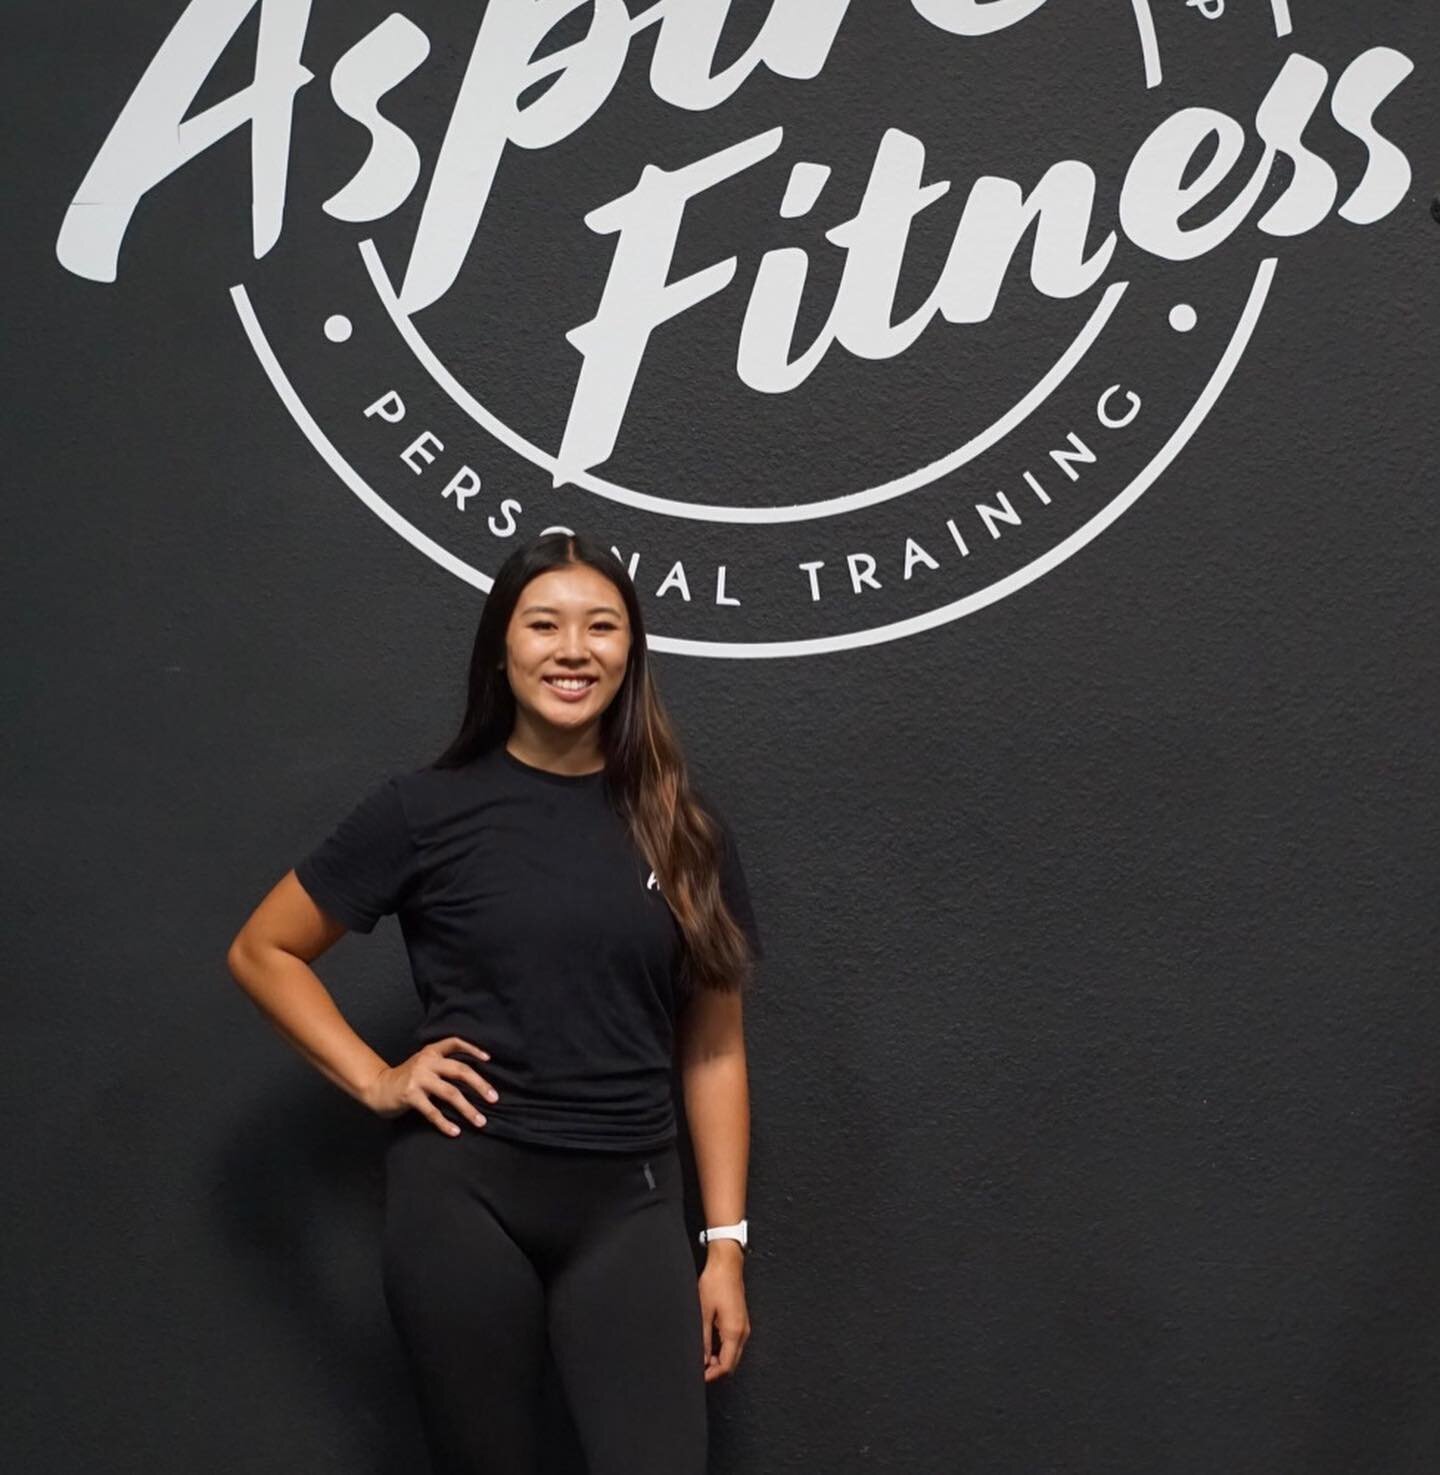 Meet our newest trainer Leilah! 💗🤍

Leilah is a dedicated, kind-hearted, and thoughtful trainer who is passionate about fitness and strength training. In the past, Leilah has always been athletic and fit from dancing, so to continue her healthy lif